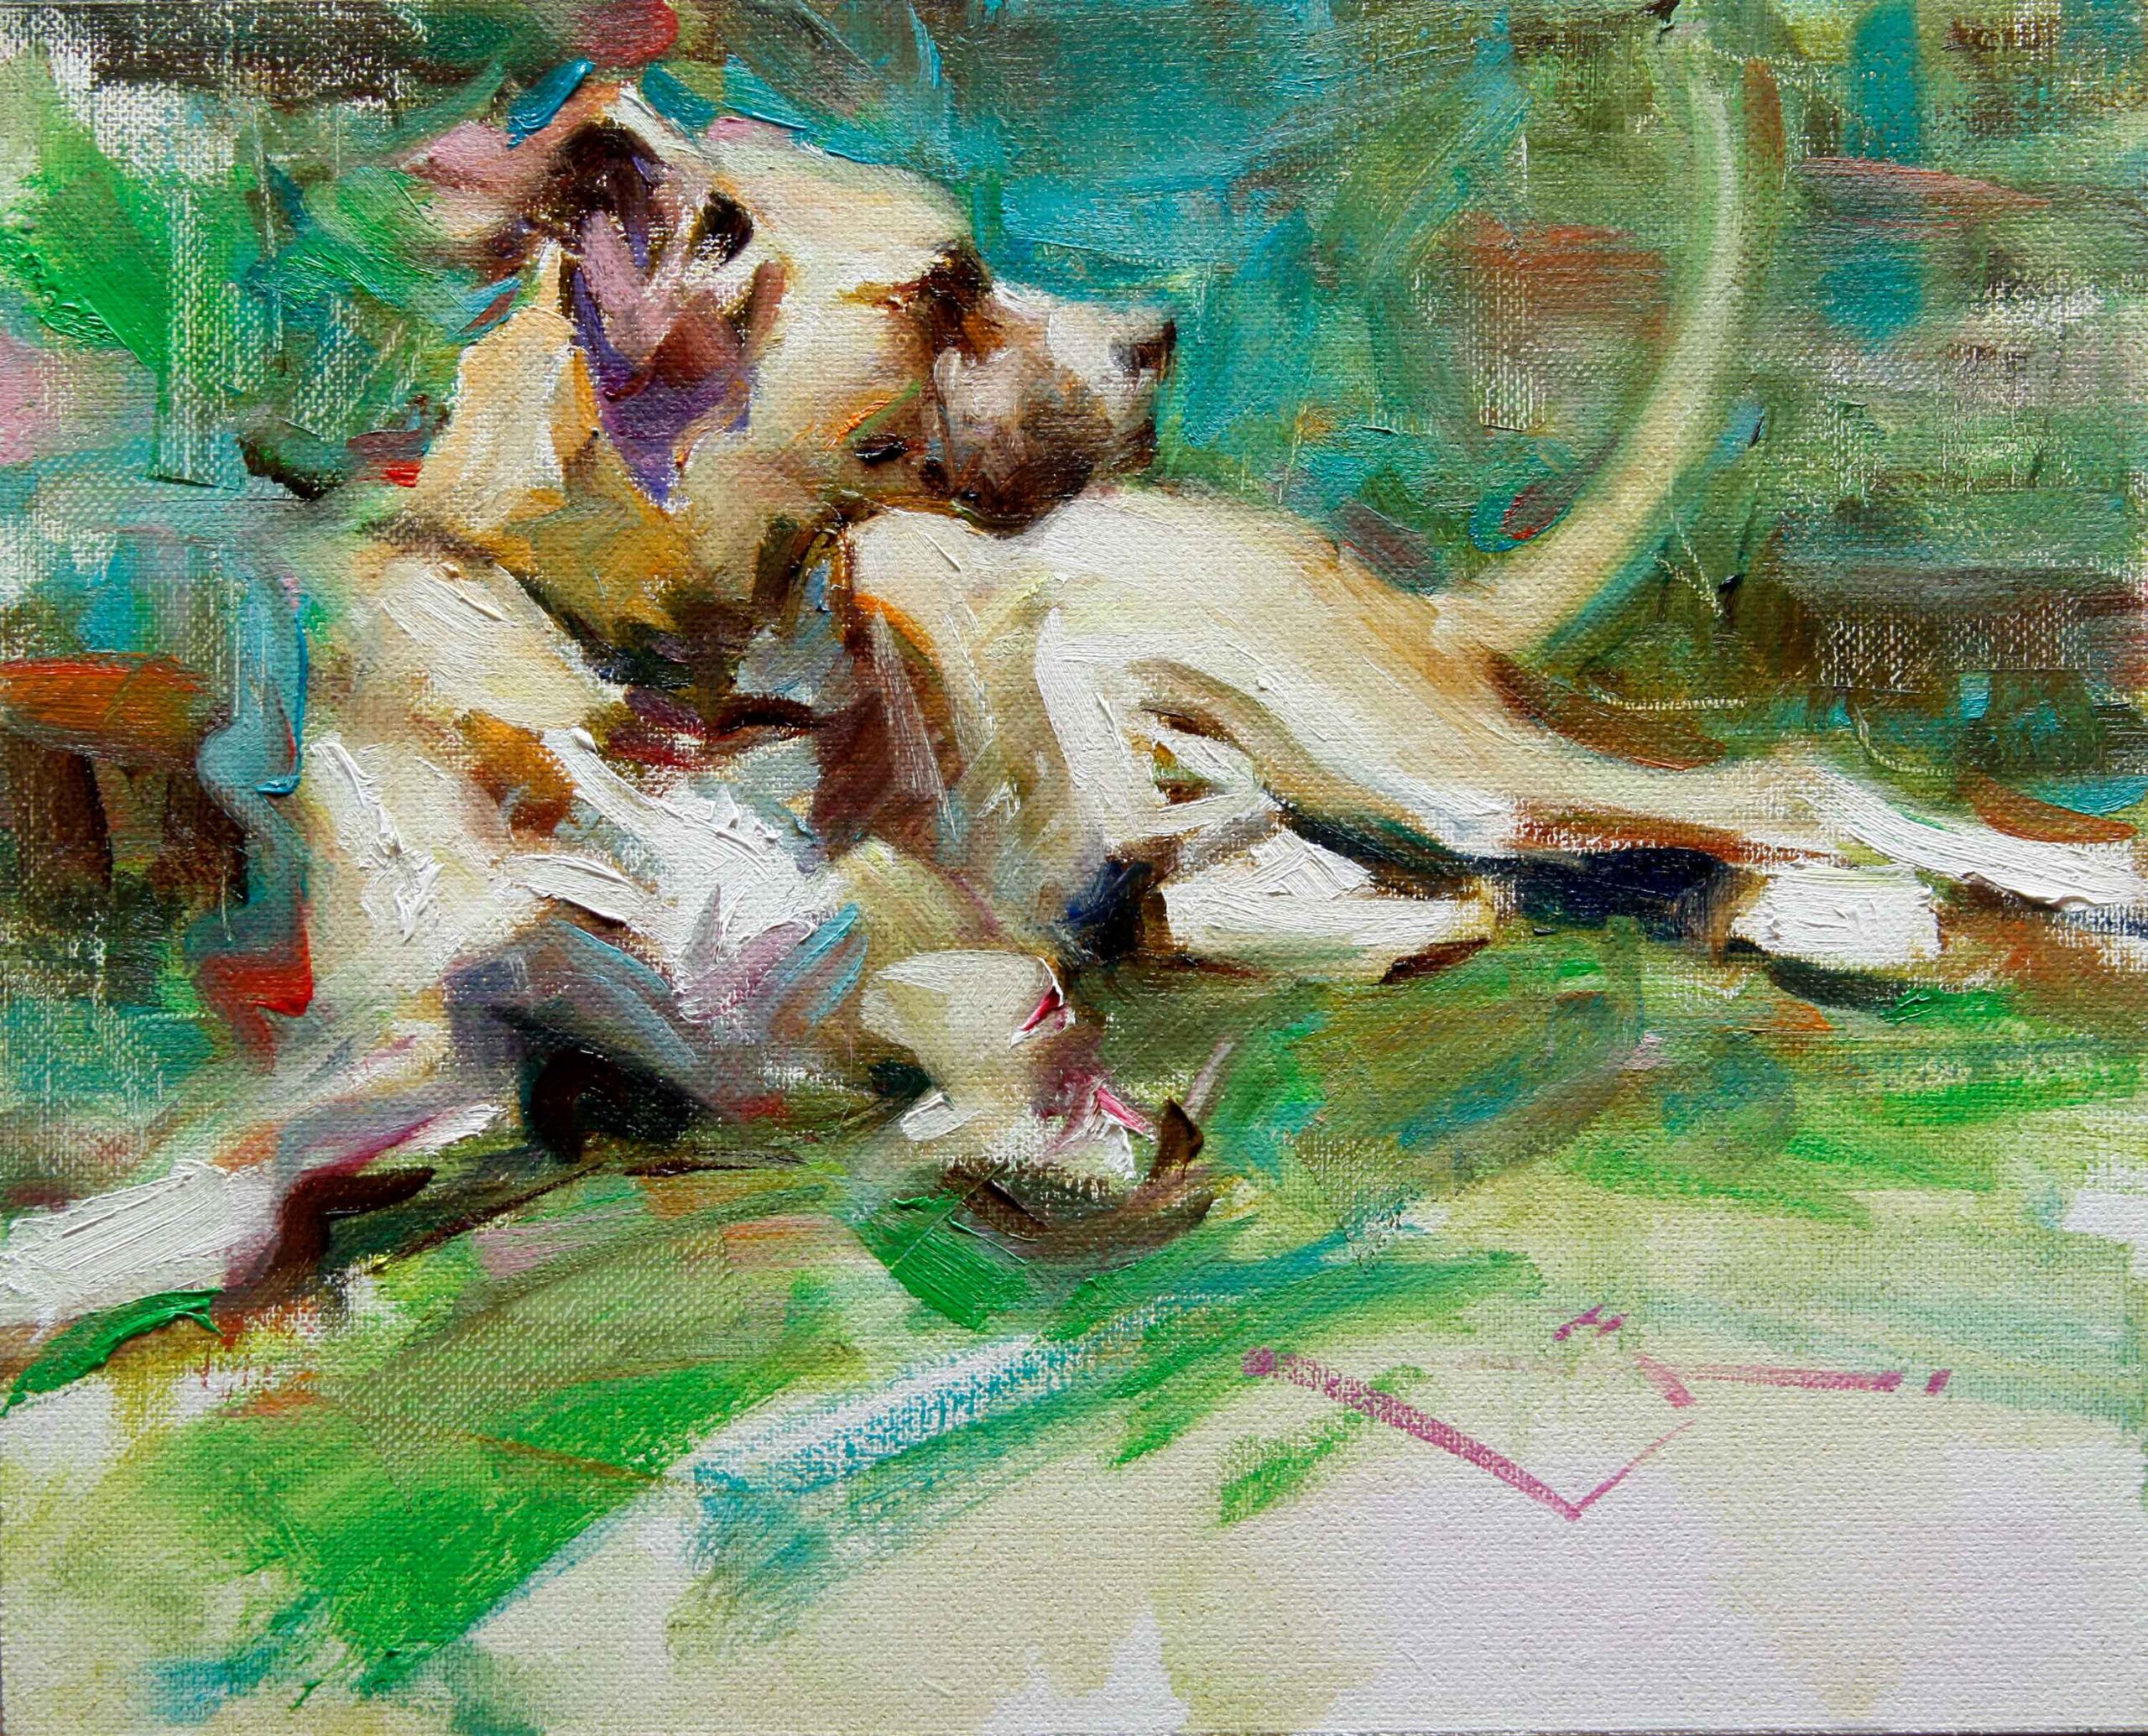 Painting of a dog - Kevin Beilfuss, "King of the Yard," 8 x 36 in.